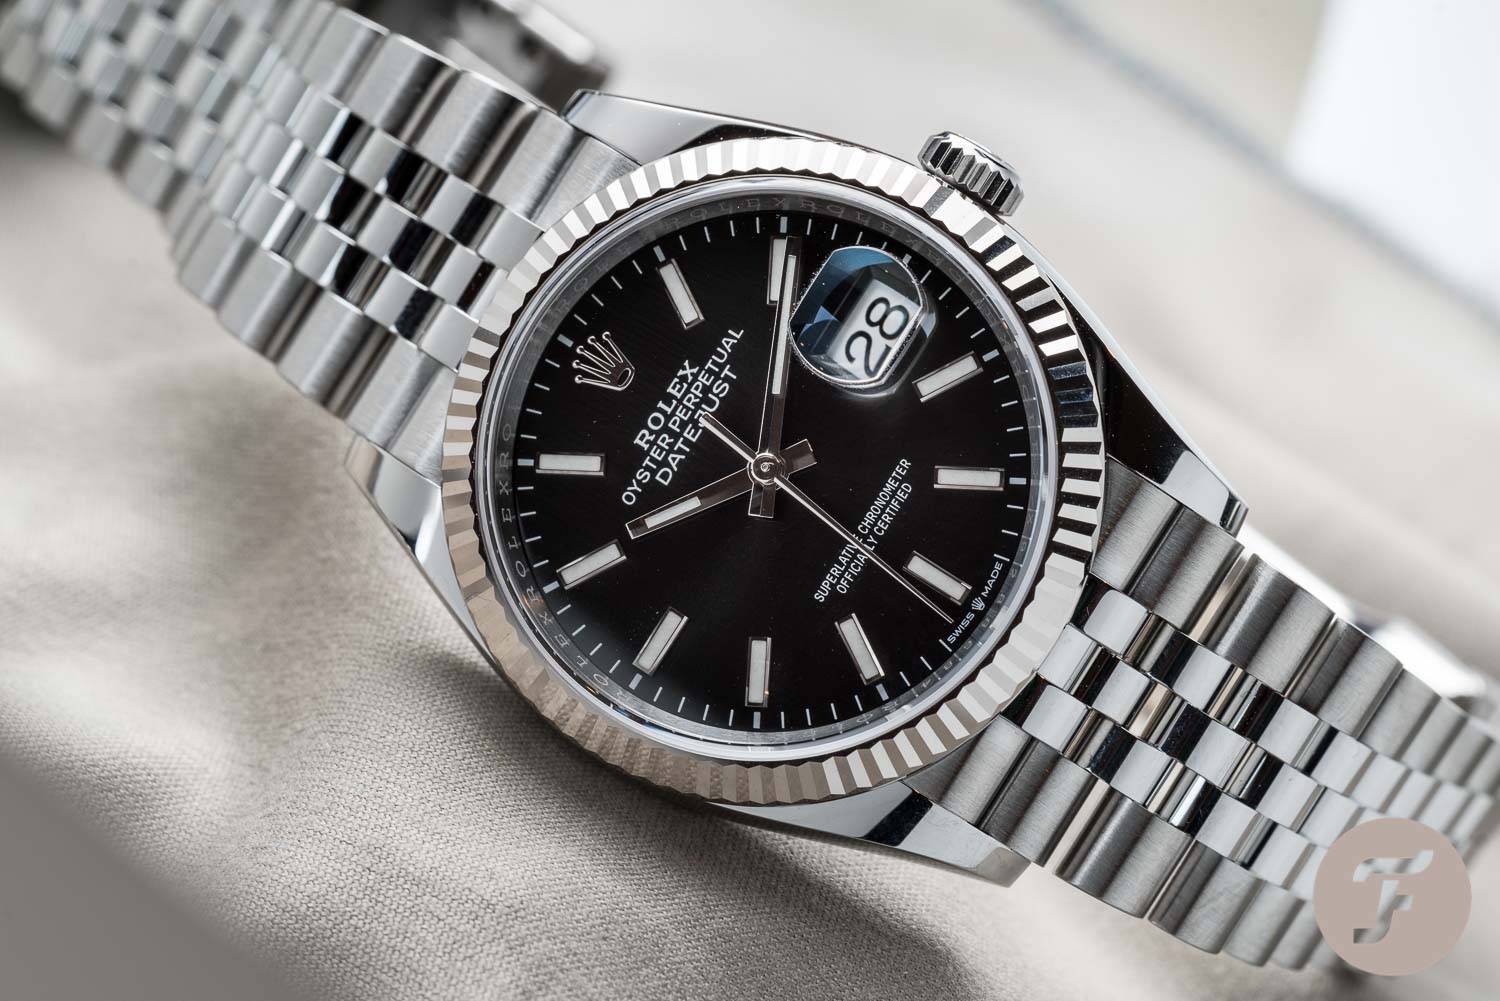 Top 10 Rolex Watches - Overview of 